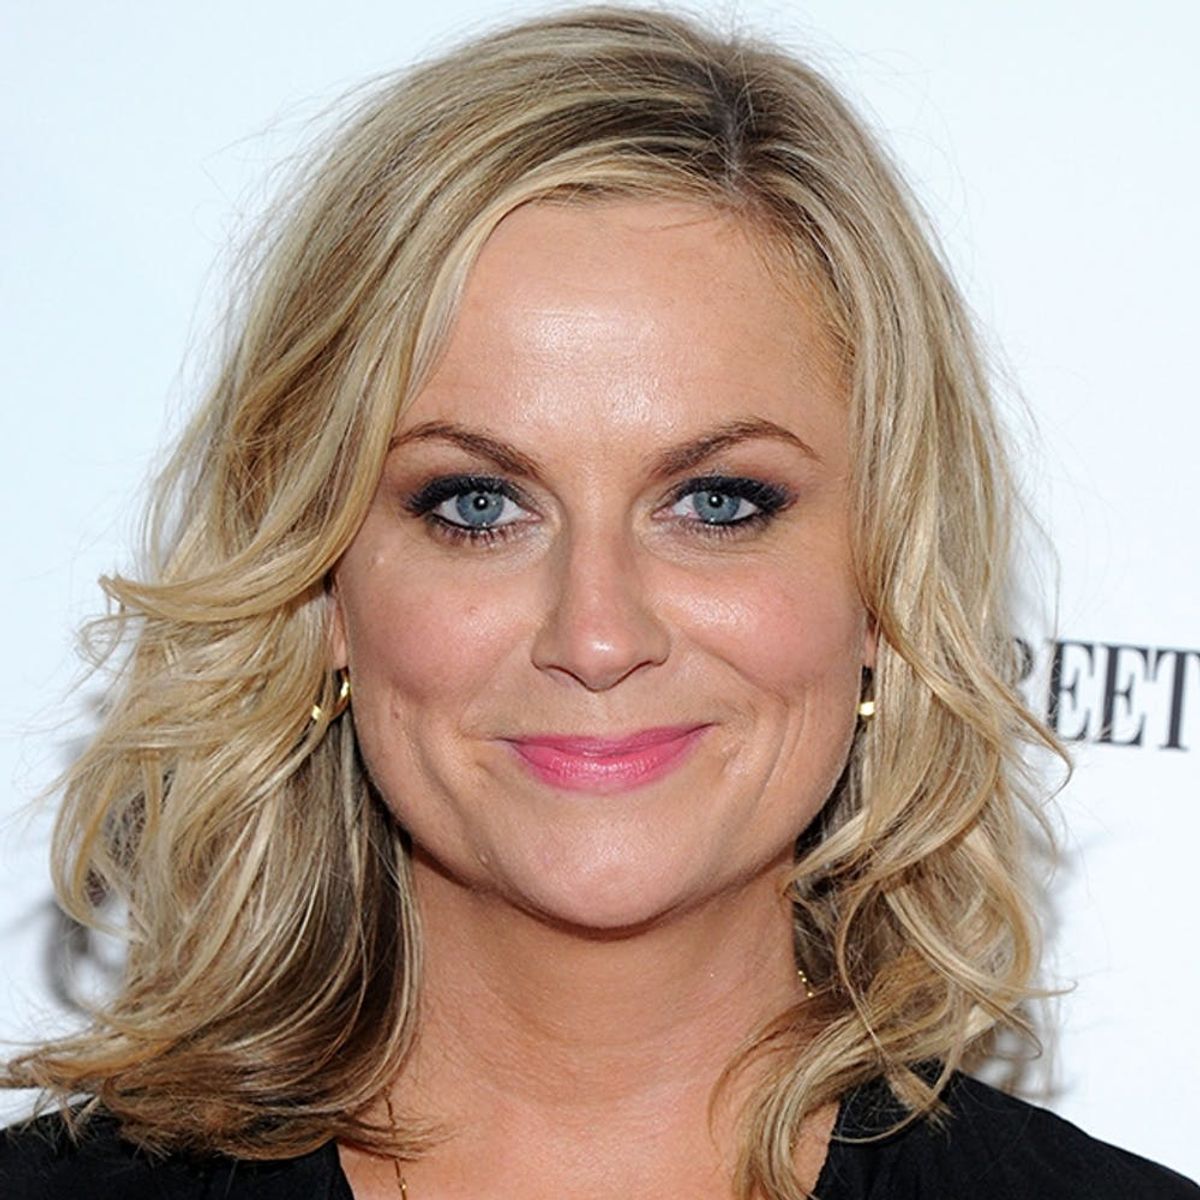 5 Comebacks for Dealing With Rude People from Amy Poehler